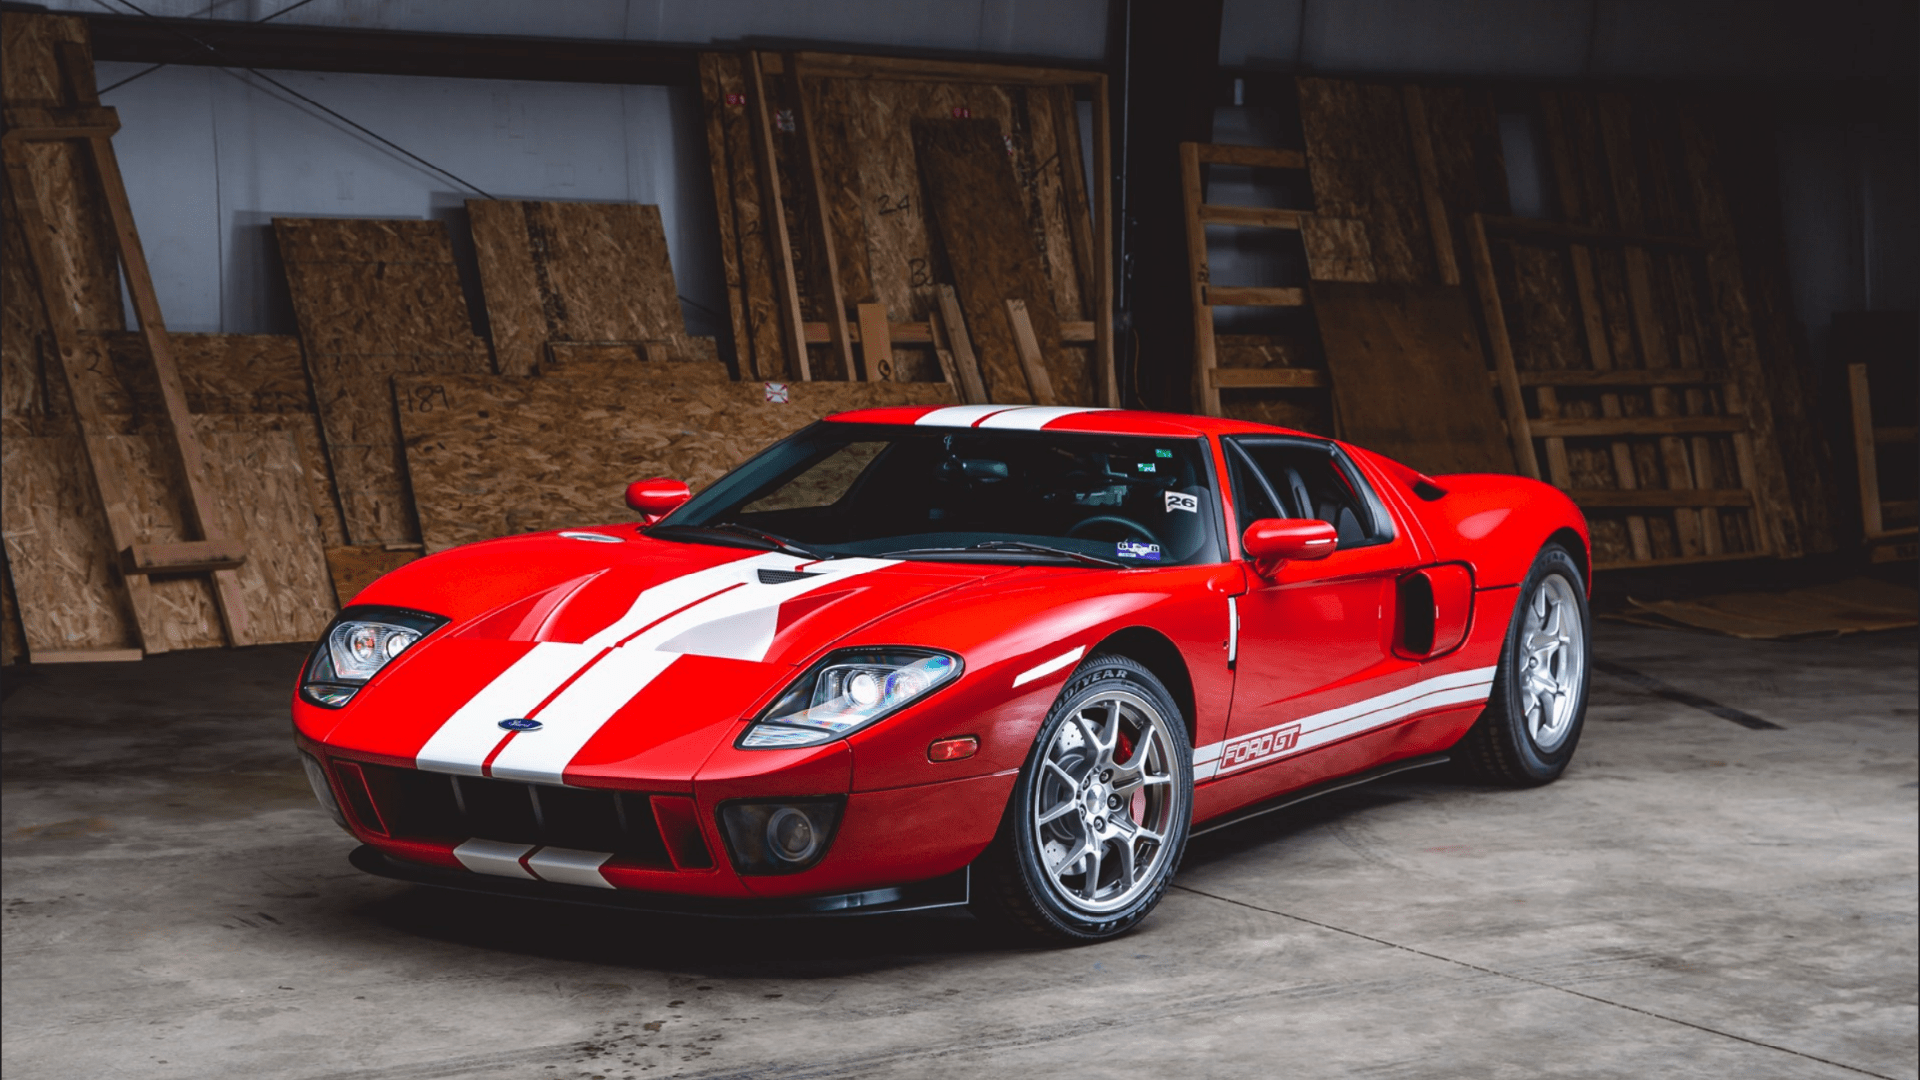 Pristine 2006 Ford GT With Ridiculous 11.7 Miles Heading to Auction